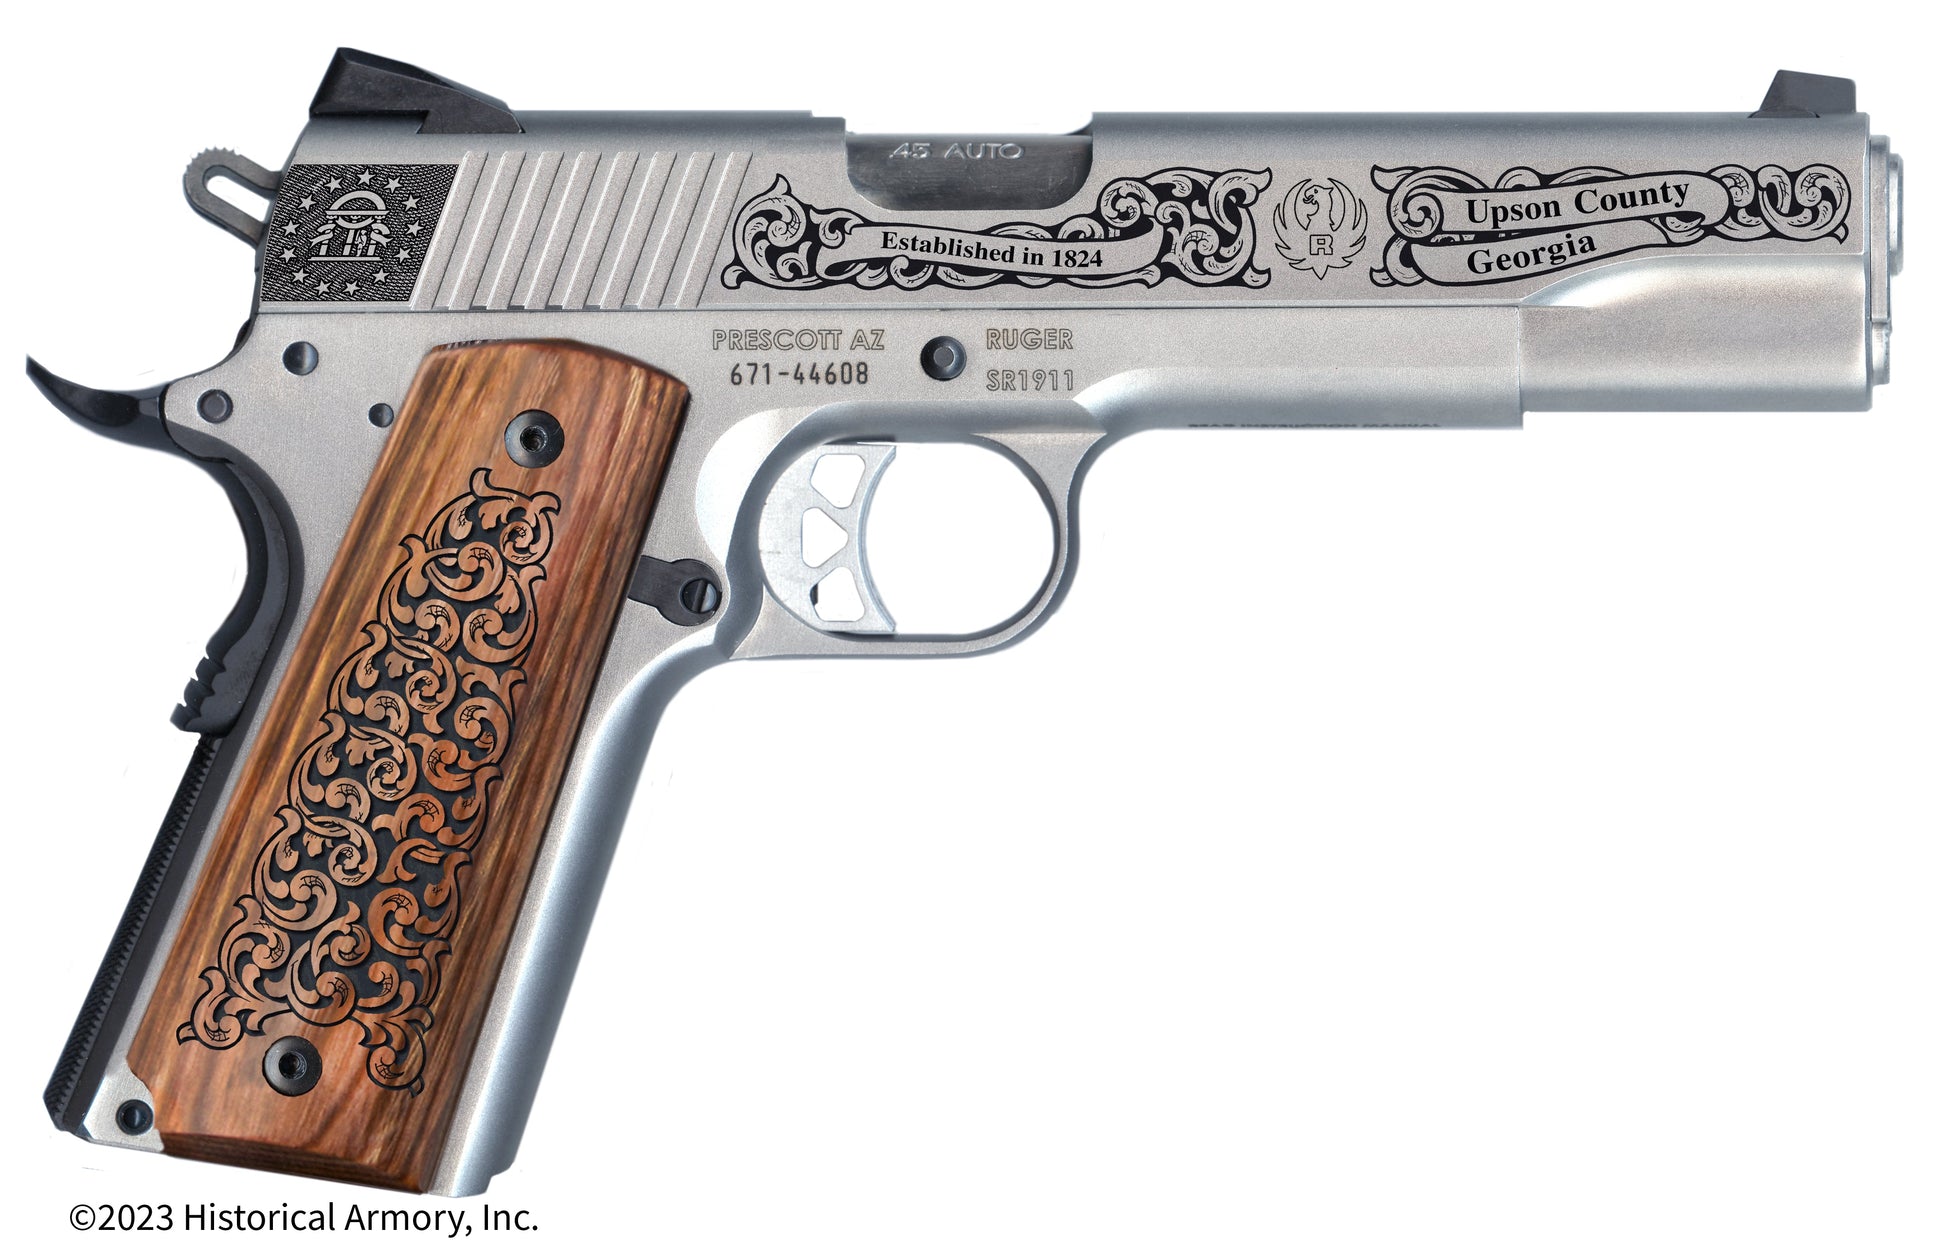 Upson County Georgia Engraved .45 Auto Ruger 1911